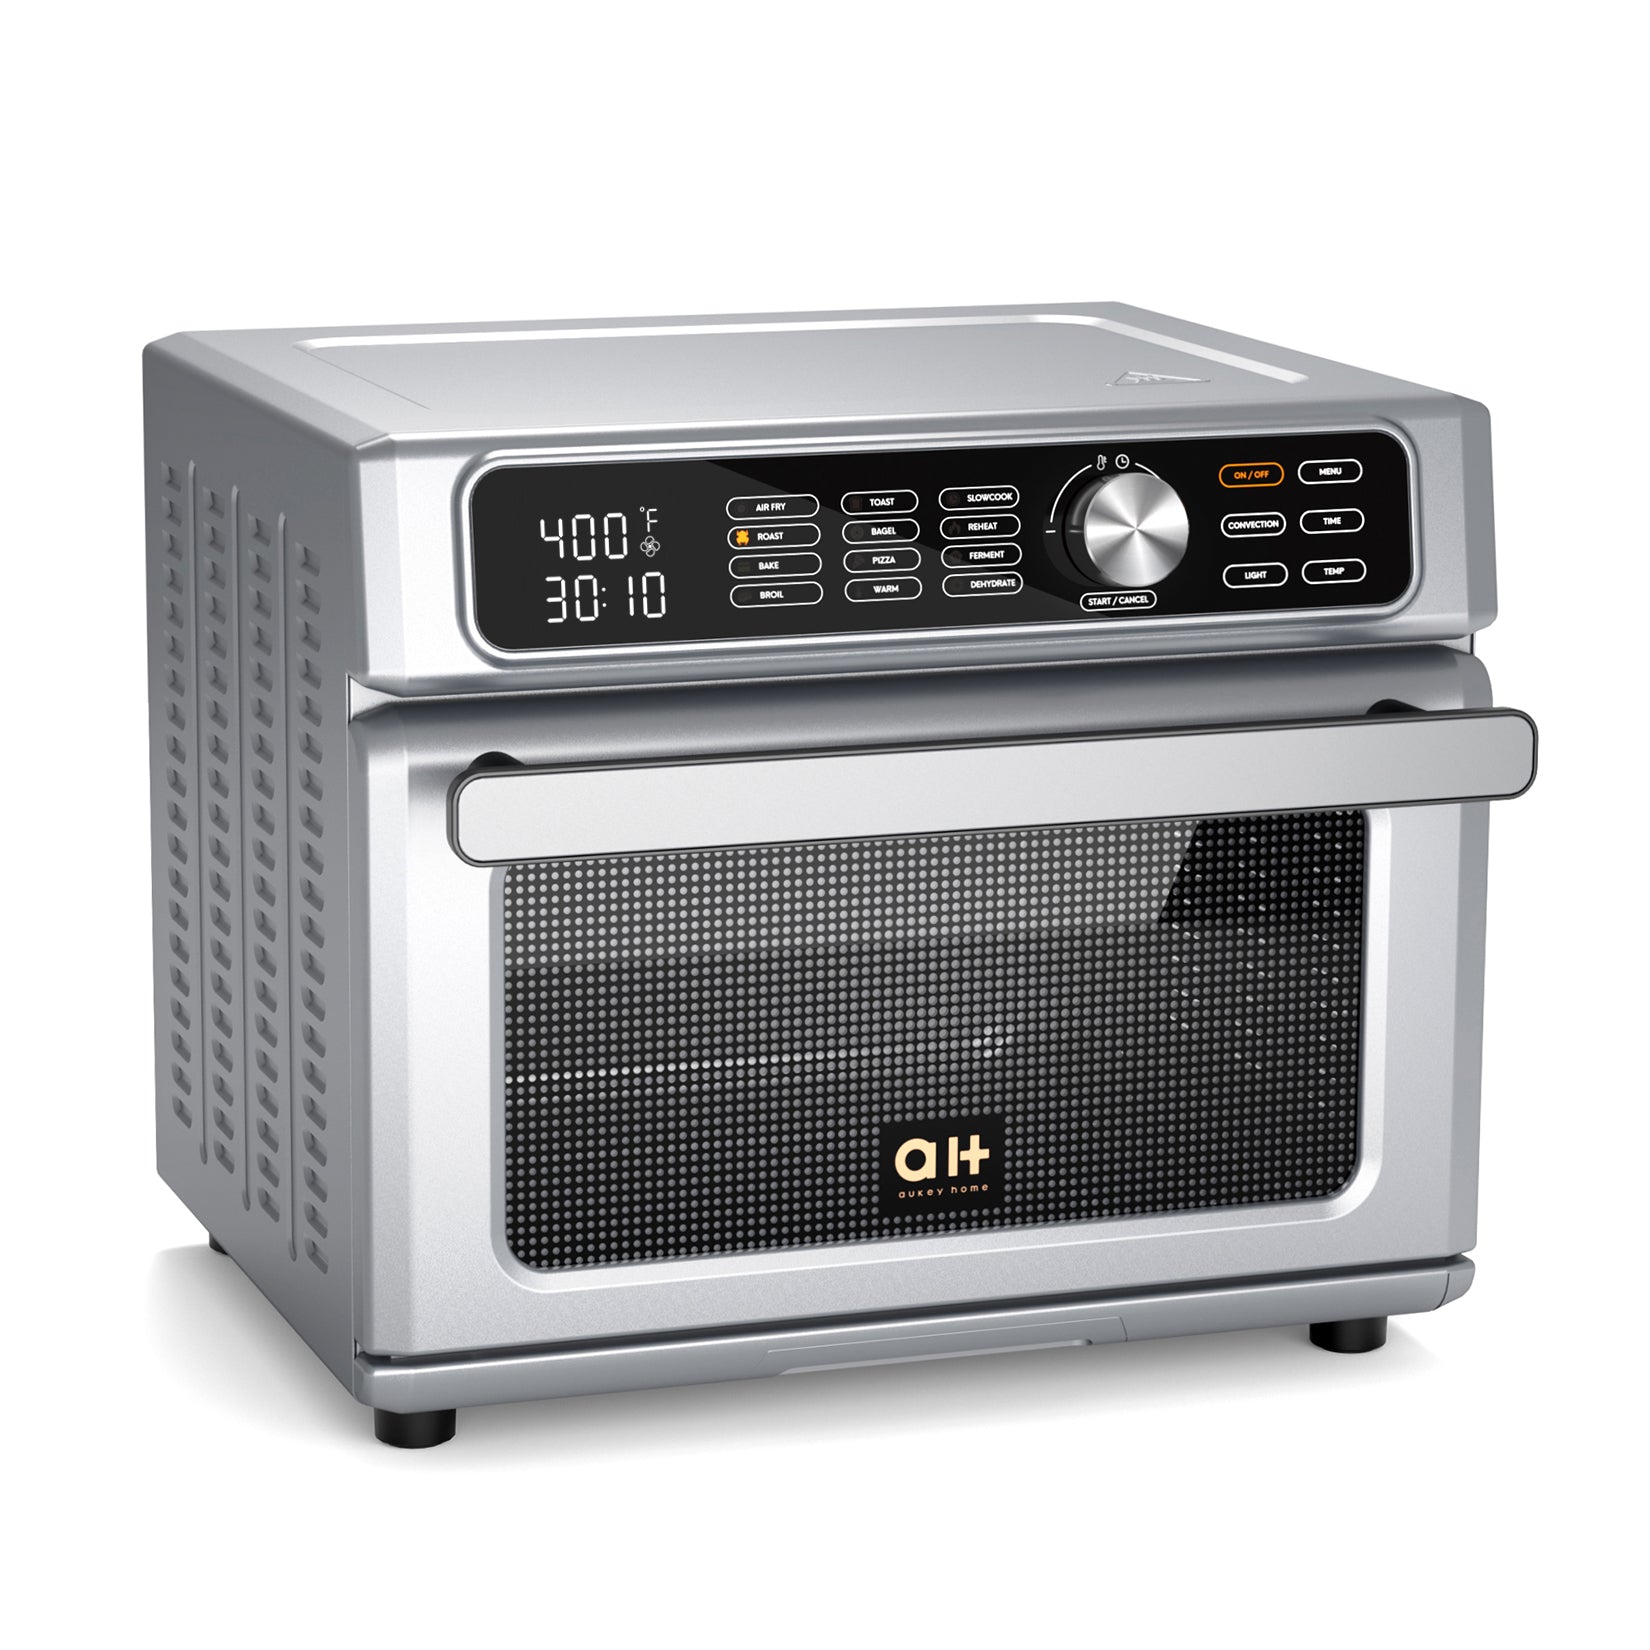 Fryer Oven, 13-in-1 Convection Oven, 24QT Air Fryer Combo